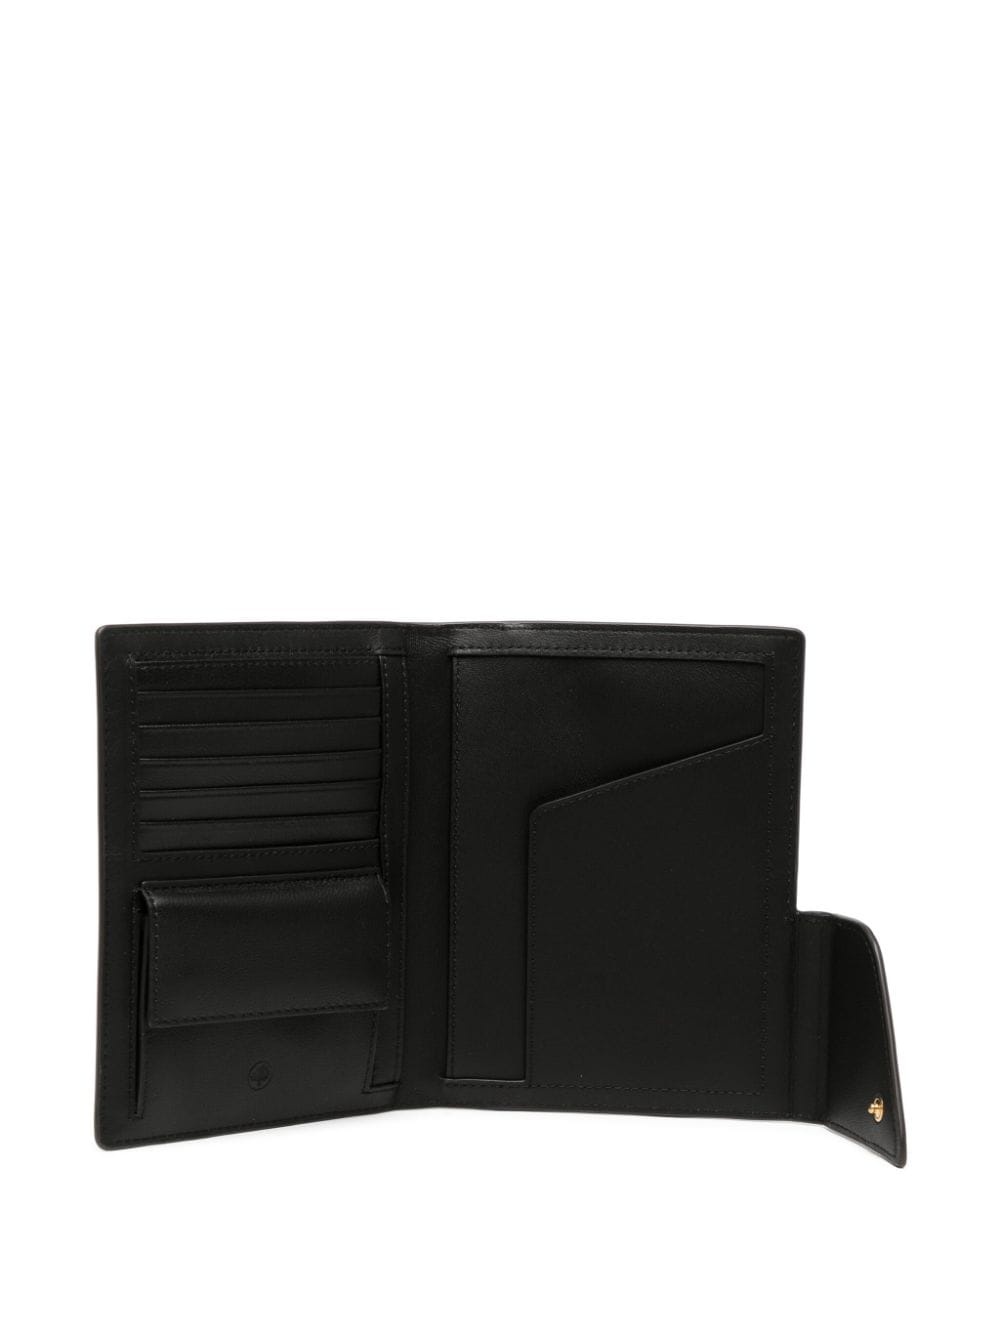 Heritage Travel leather wallet - 3